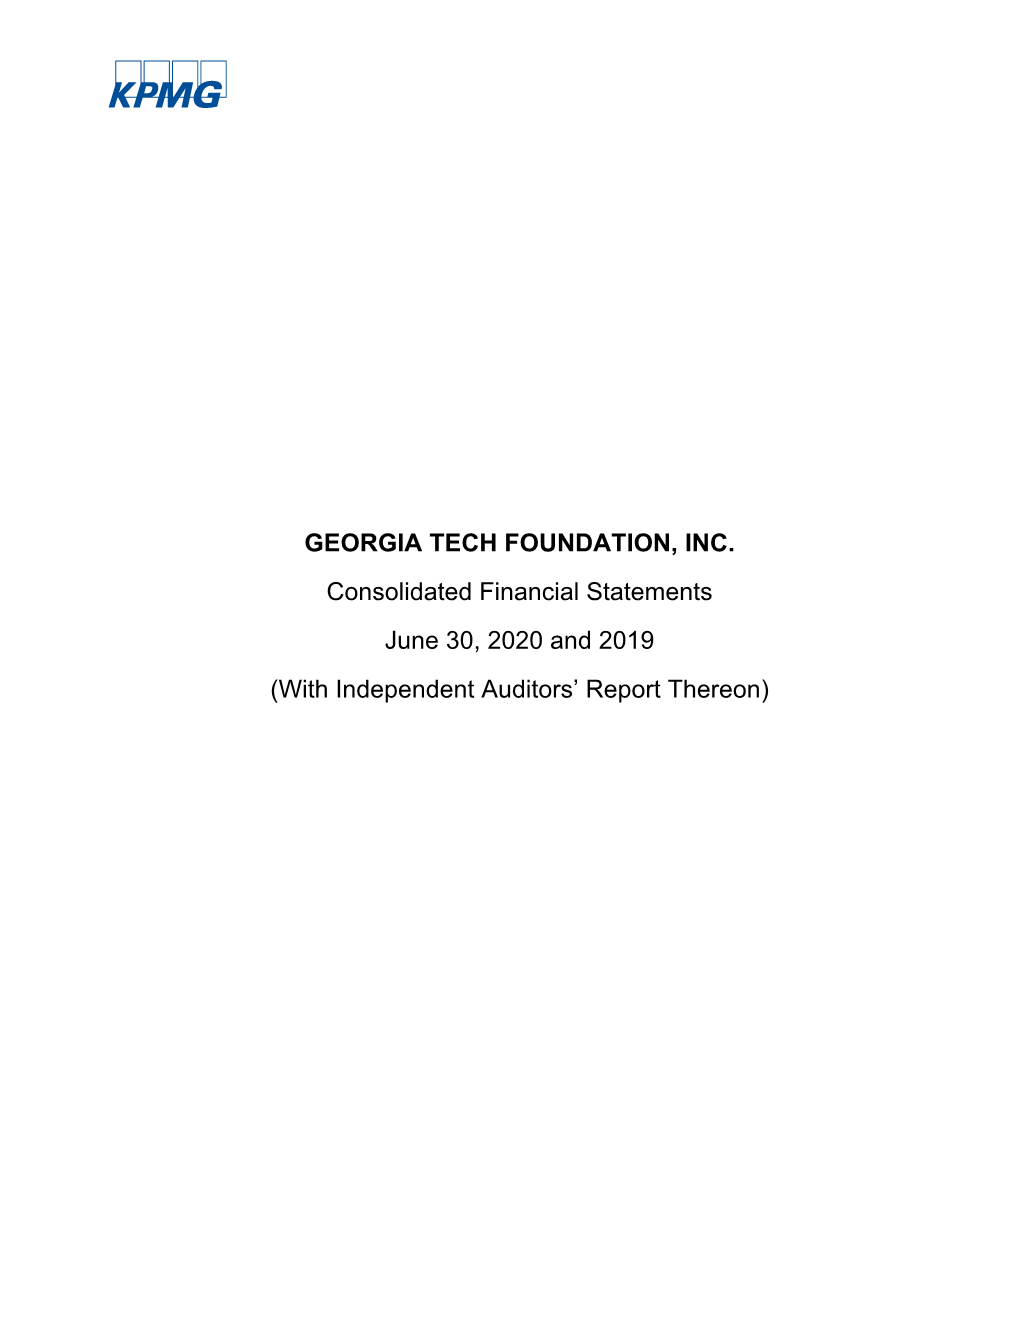 GEORGIA TECH FOUNDATION, INC. Consolidated Financial Statements June 30, 2020 and 2019 (With Independent Auditors' Report Ther